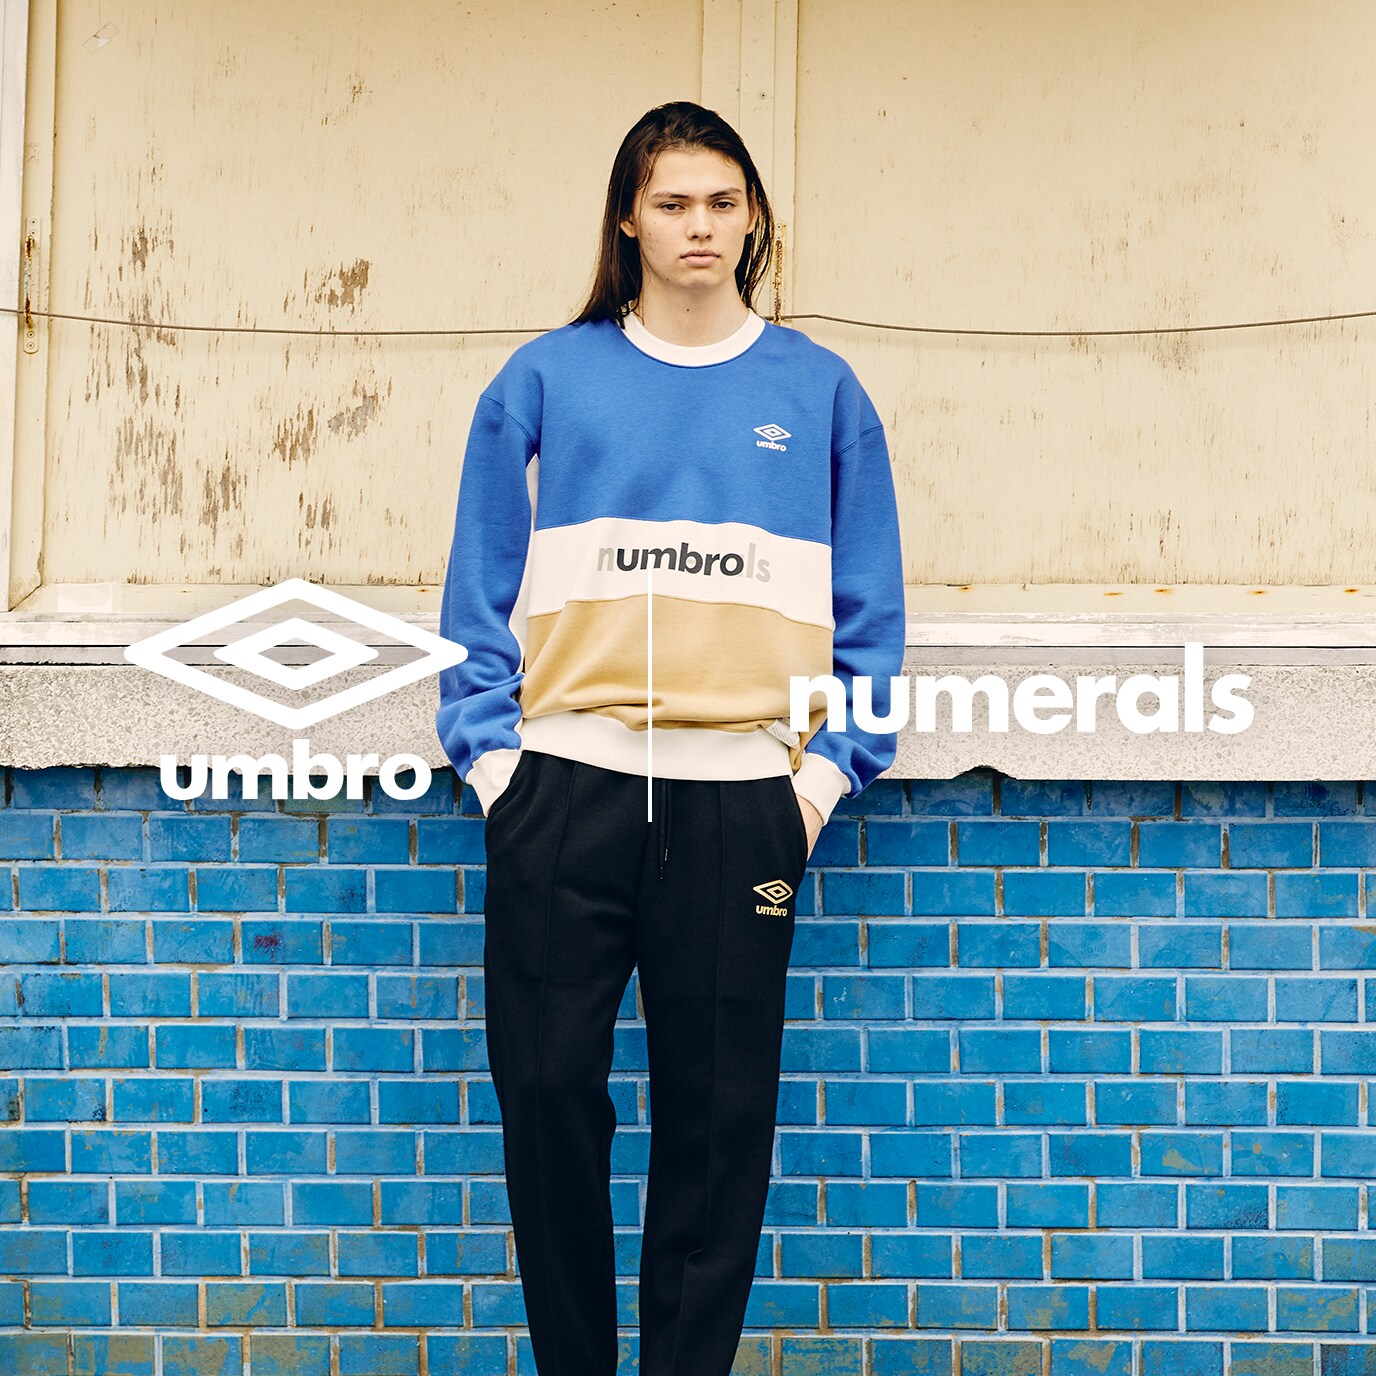 NUMERALS×UMBRO 2021 AW collection